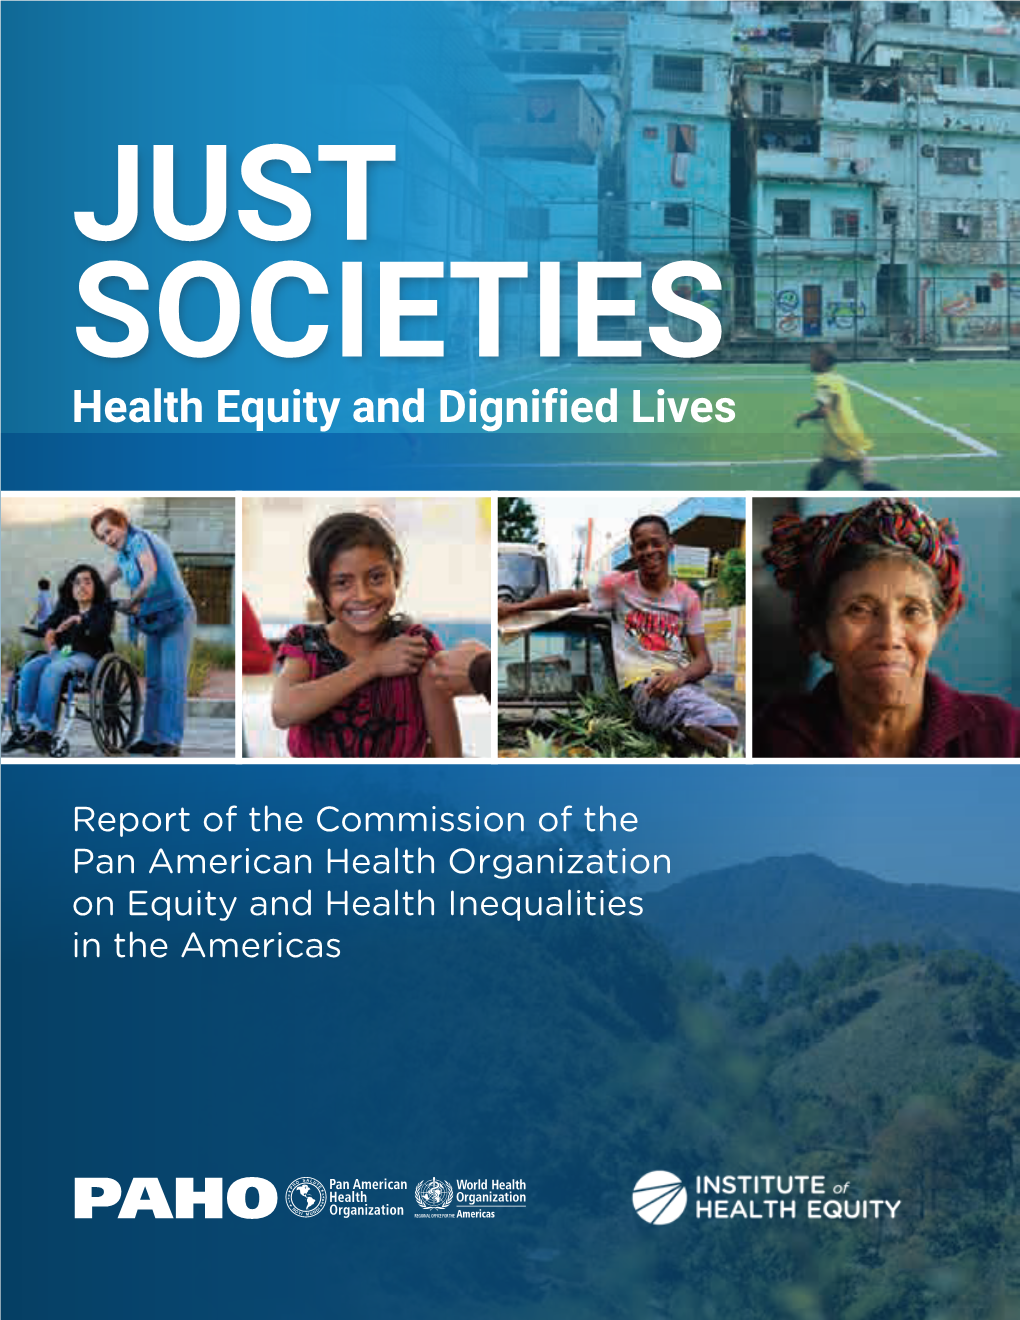 Health Equity and Dignified Lives